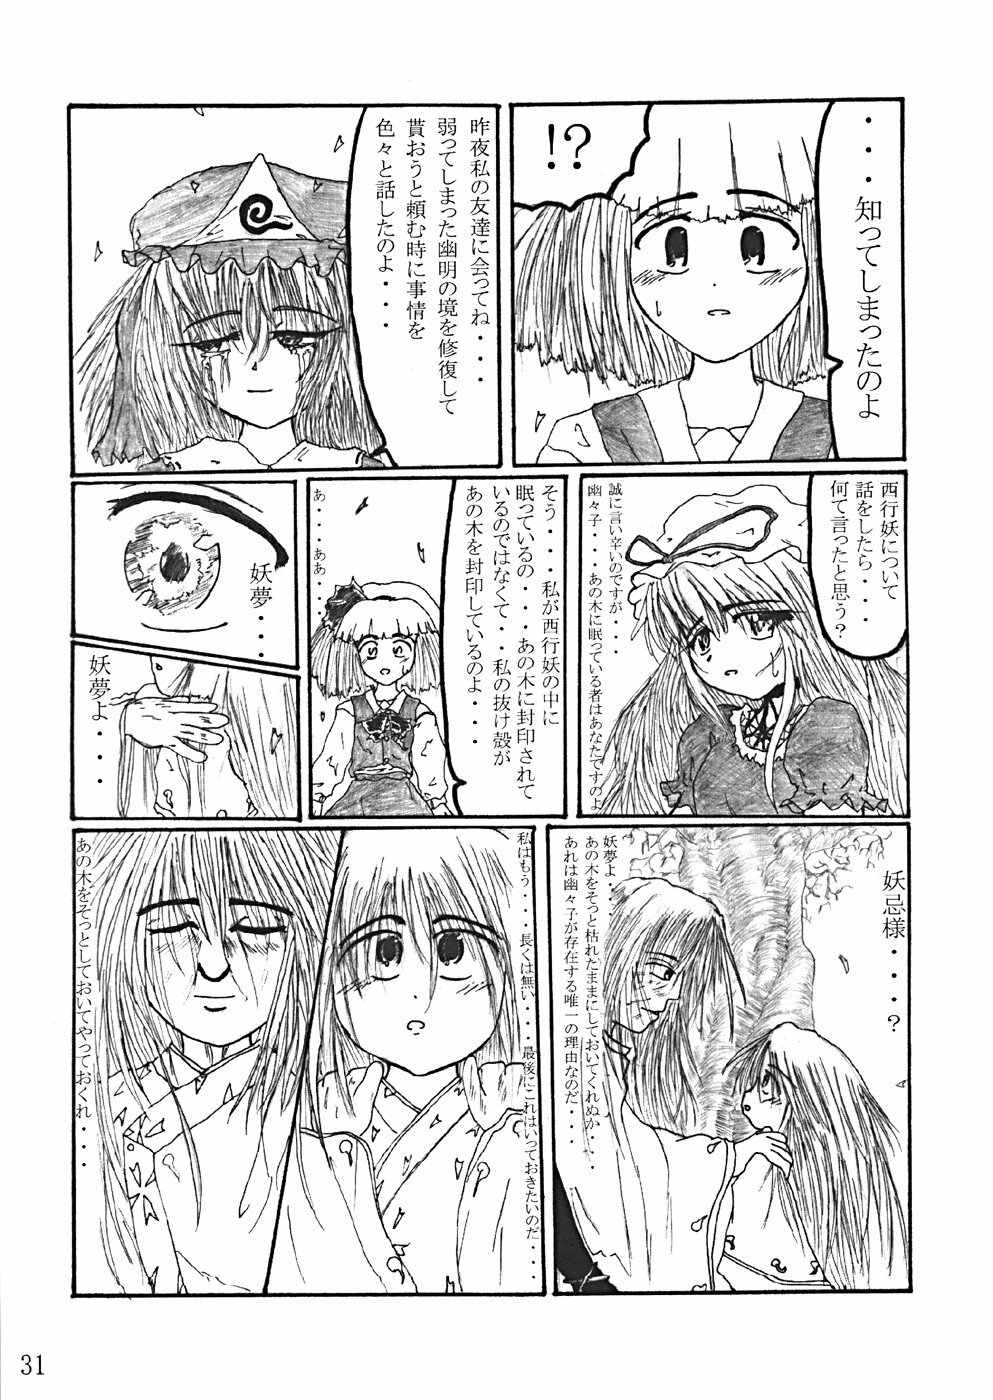 (CR35) [LemonMaiden (Various)] Oukasai ～ Cherry Point MAX (Touhou Project) page 34 full